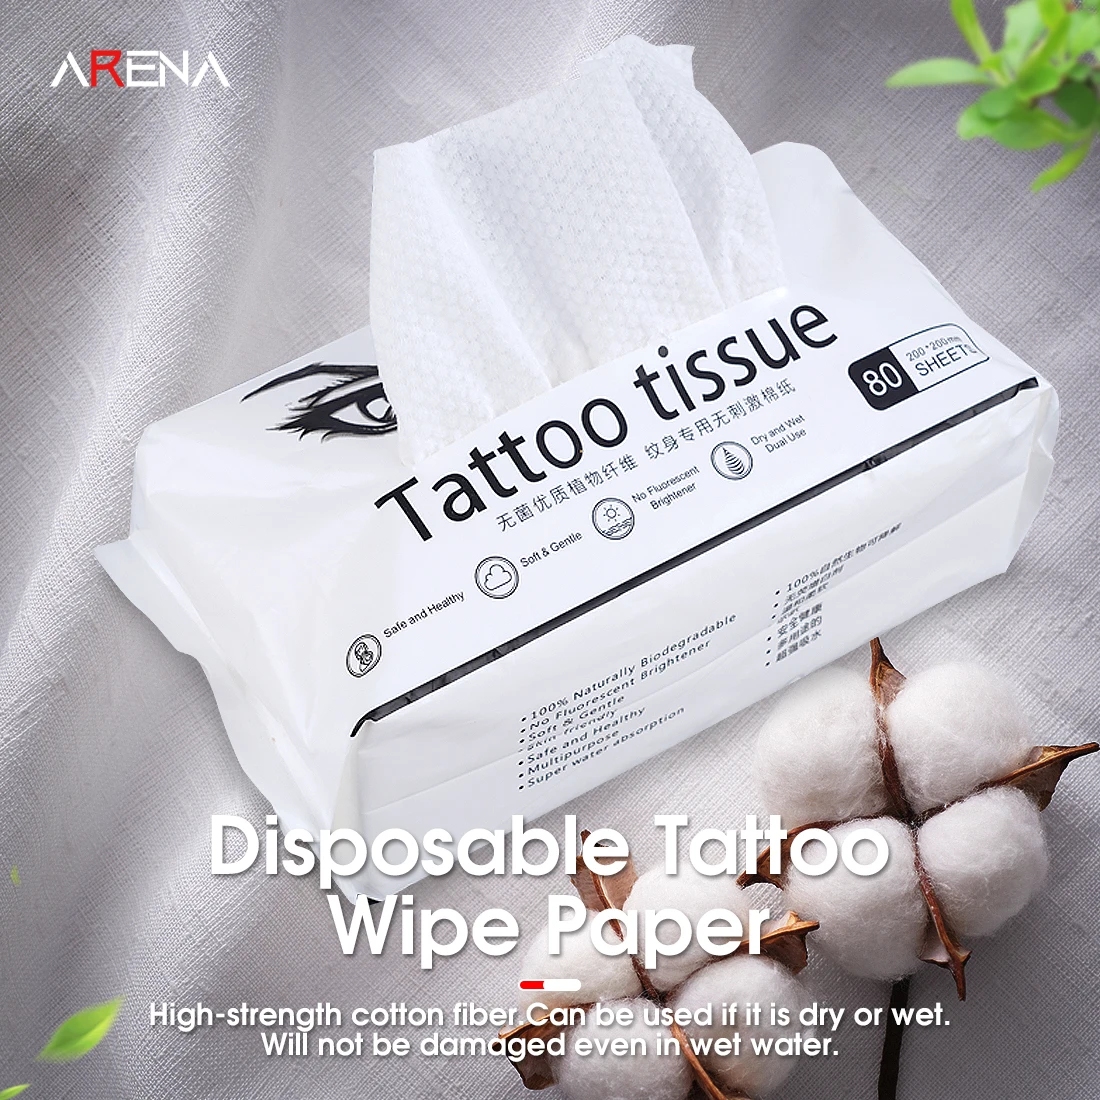 80pcs Arenahawk White Disposable Tattoo Wipe Paper Soft Tissue Skin Cloth Towel Body Art Cleaning Makeup Tattoo Supplies tattoo fullbody white табурет